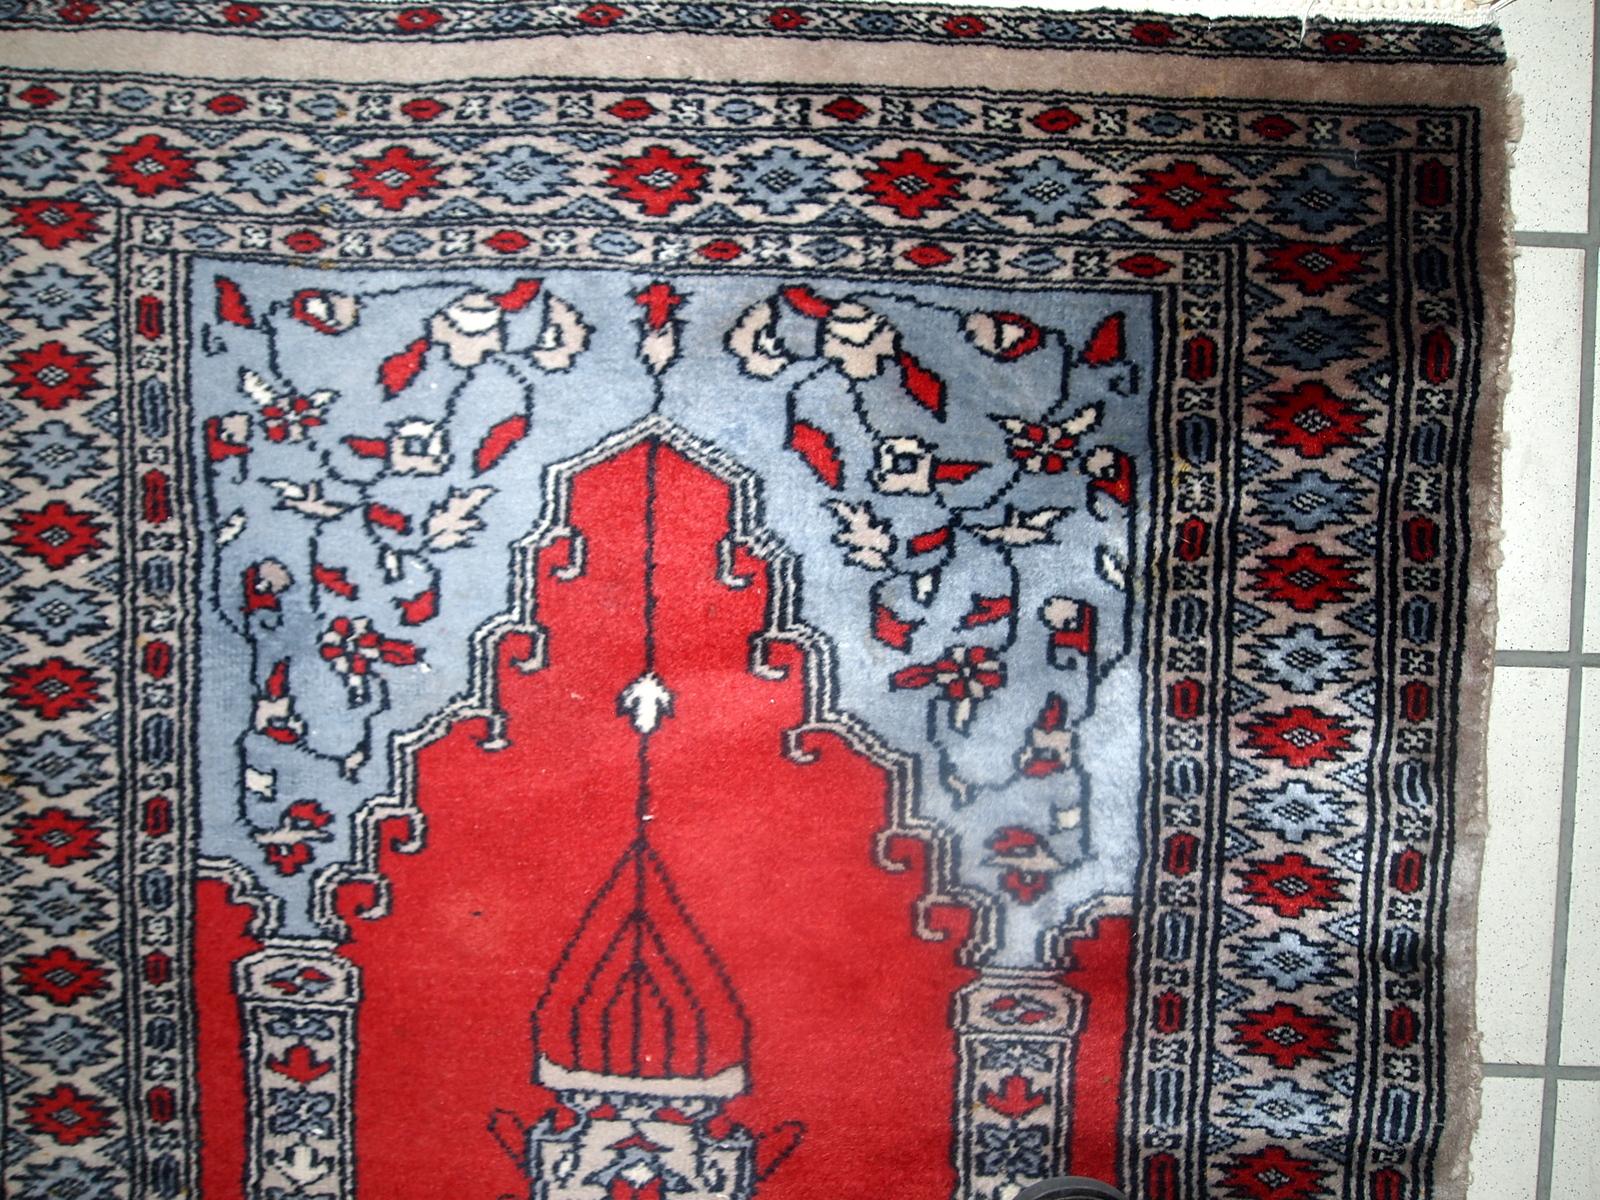 Vintage handmade rug from Uzbekistan in original good condition. The rug has been made in wool in the end of 20th century.

- Condition: original good,

- circa 1970s

- Size: 2.5' x 3.7' (78cm x 115cm)

- Material: wool,

- Country of